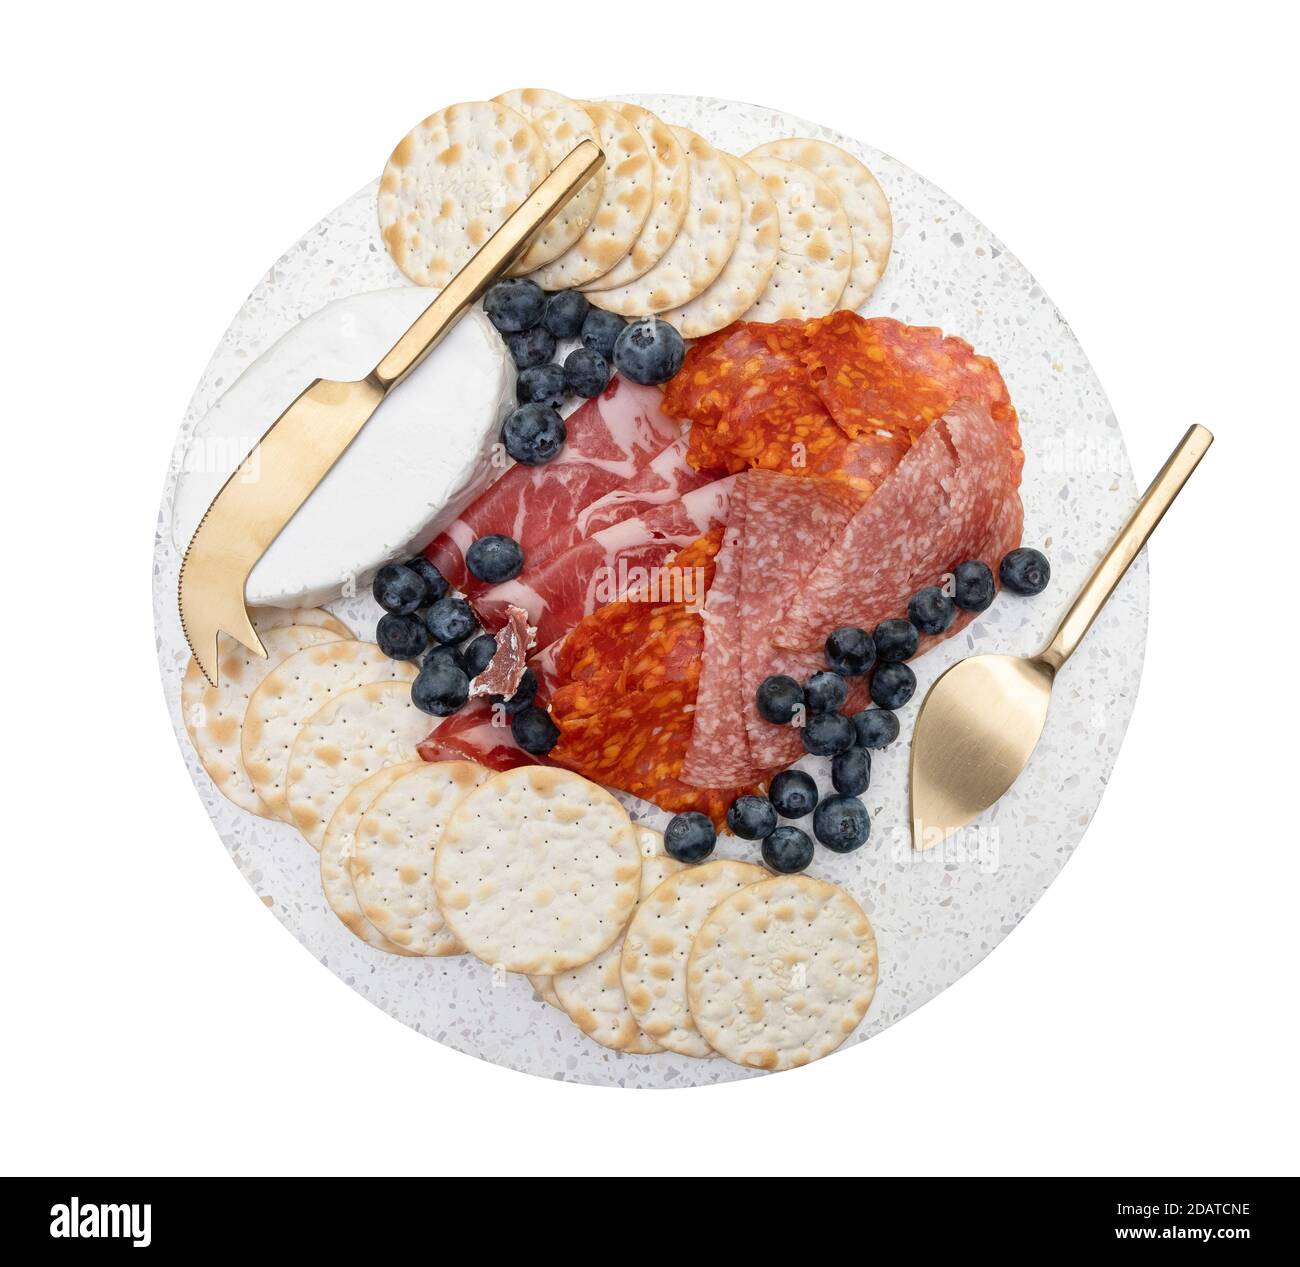 Cured meat and gourmet cheese on a plate isolated Stock Photo